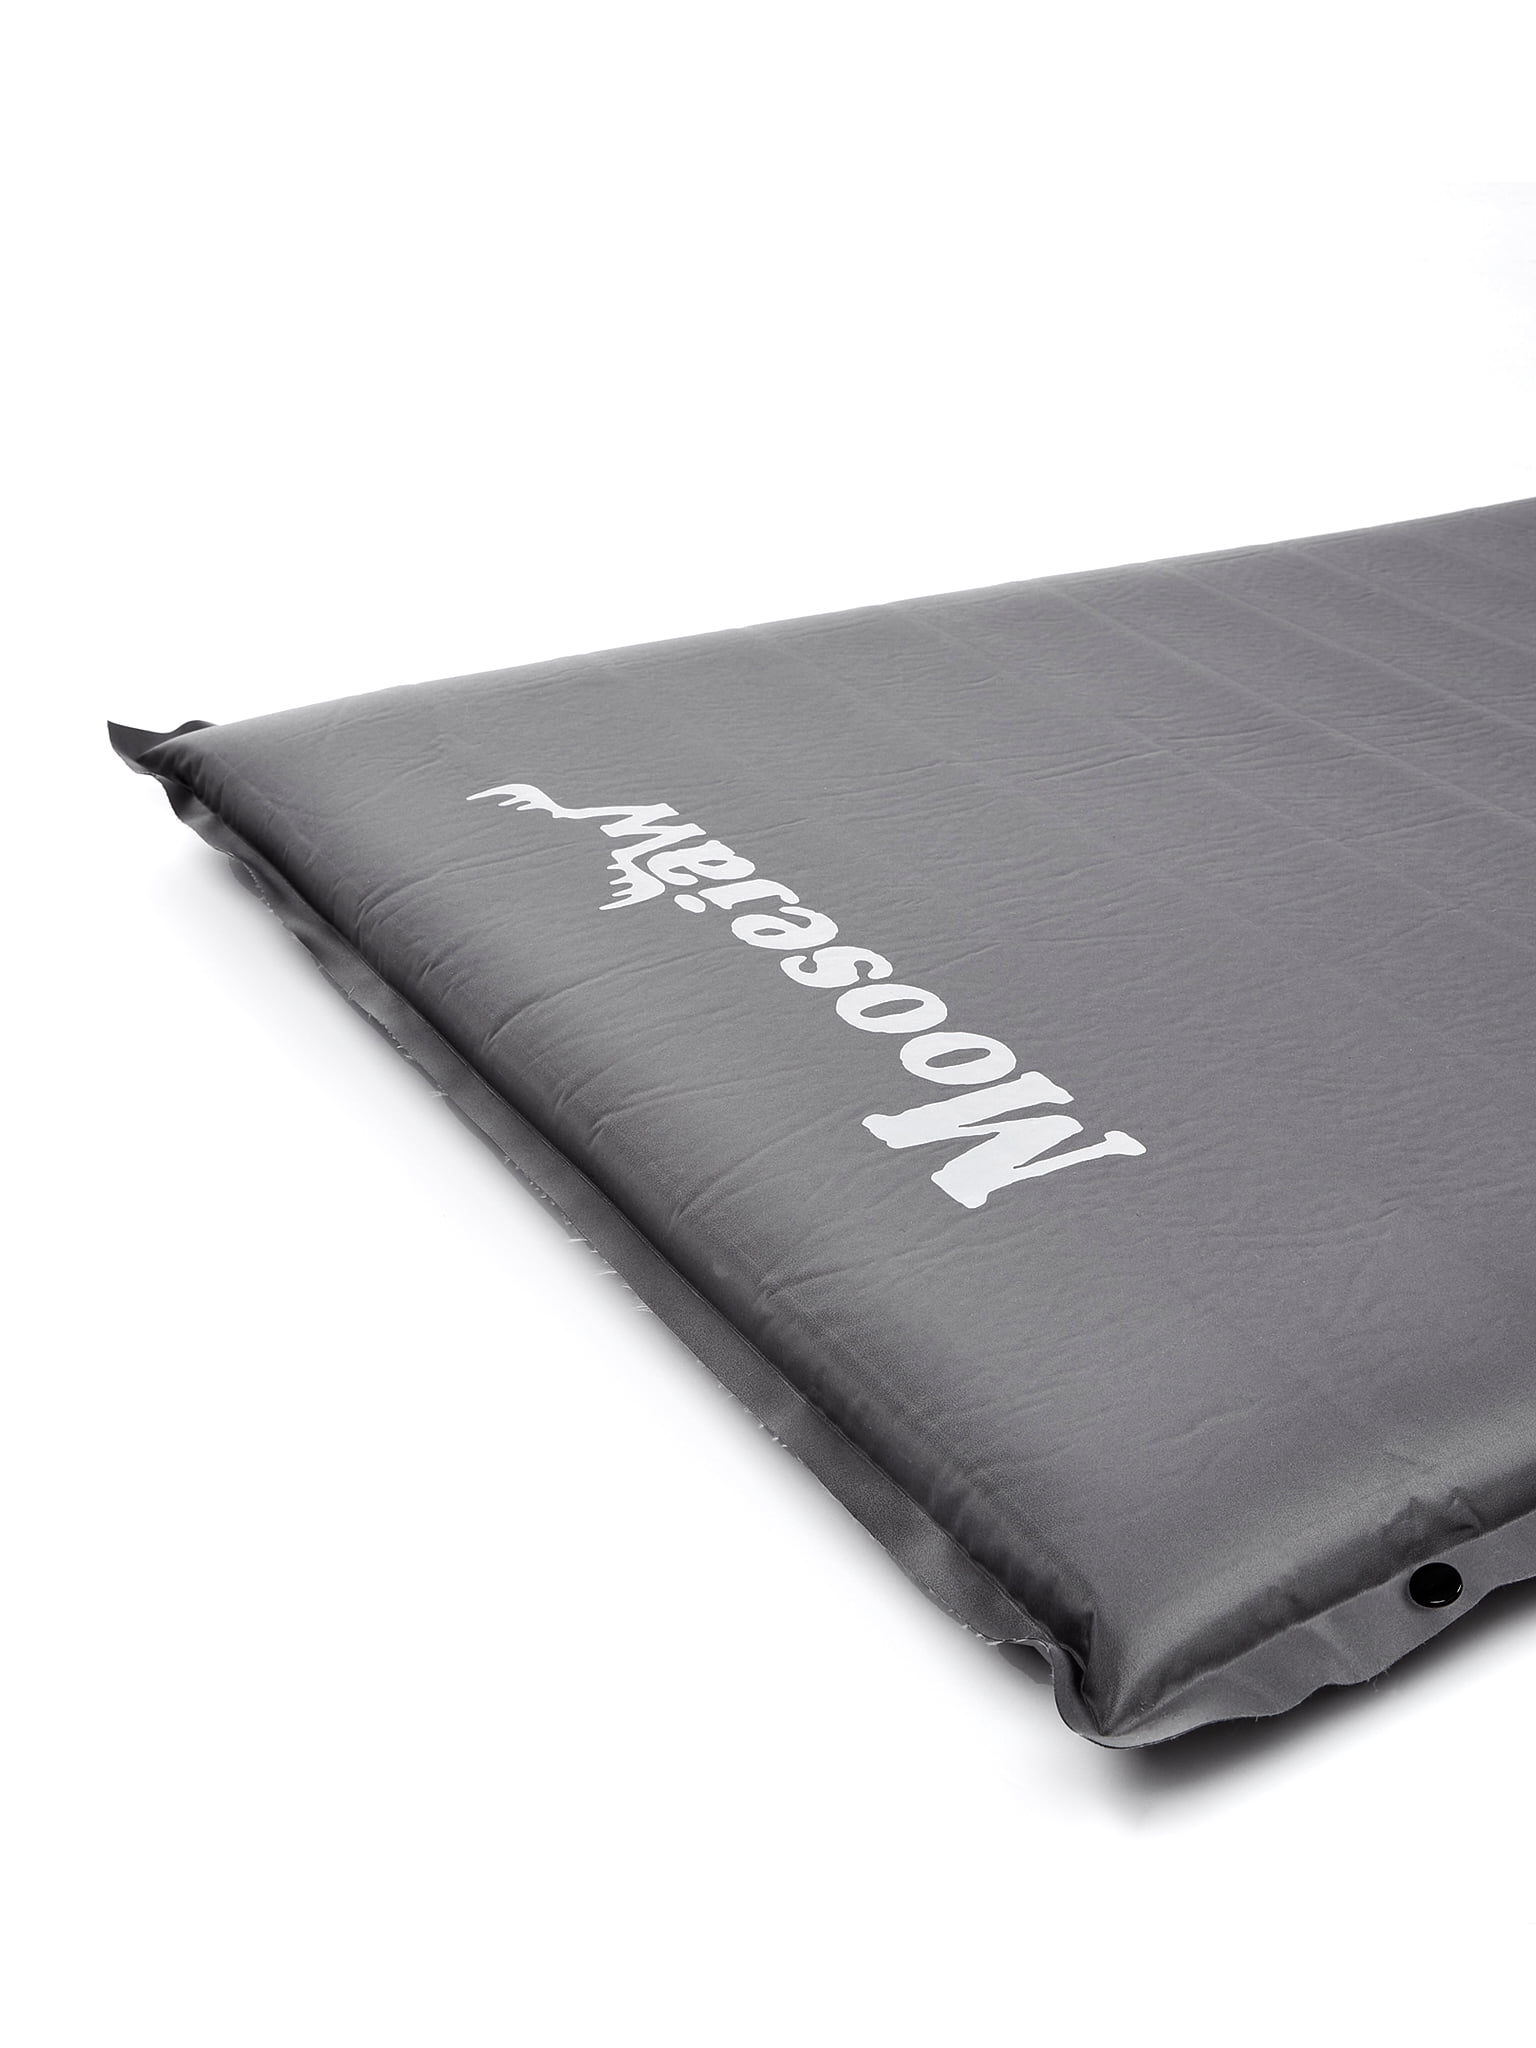 Moosejaw Ginormo 78 x 30 Self-Inflating Roll-Up Sleeping Pad, 2.5  Thickness for Camping, Backpacking, Hiking - Fits in a Carry Case 